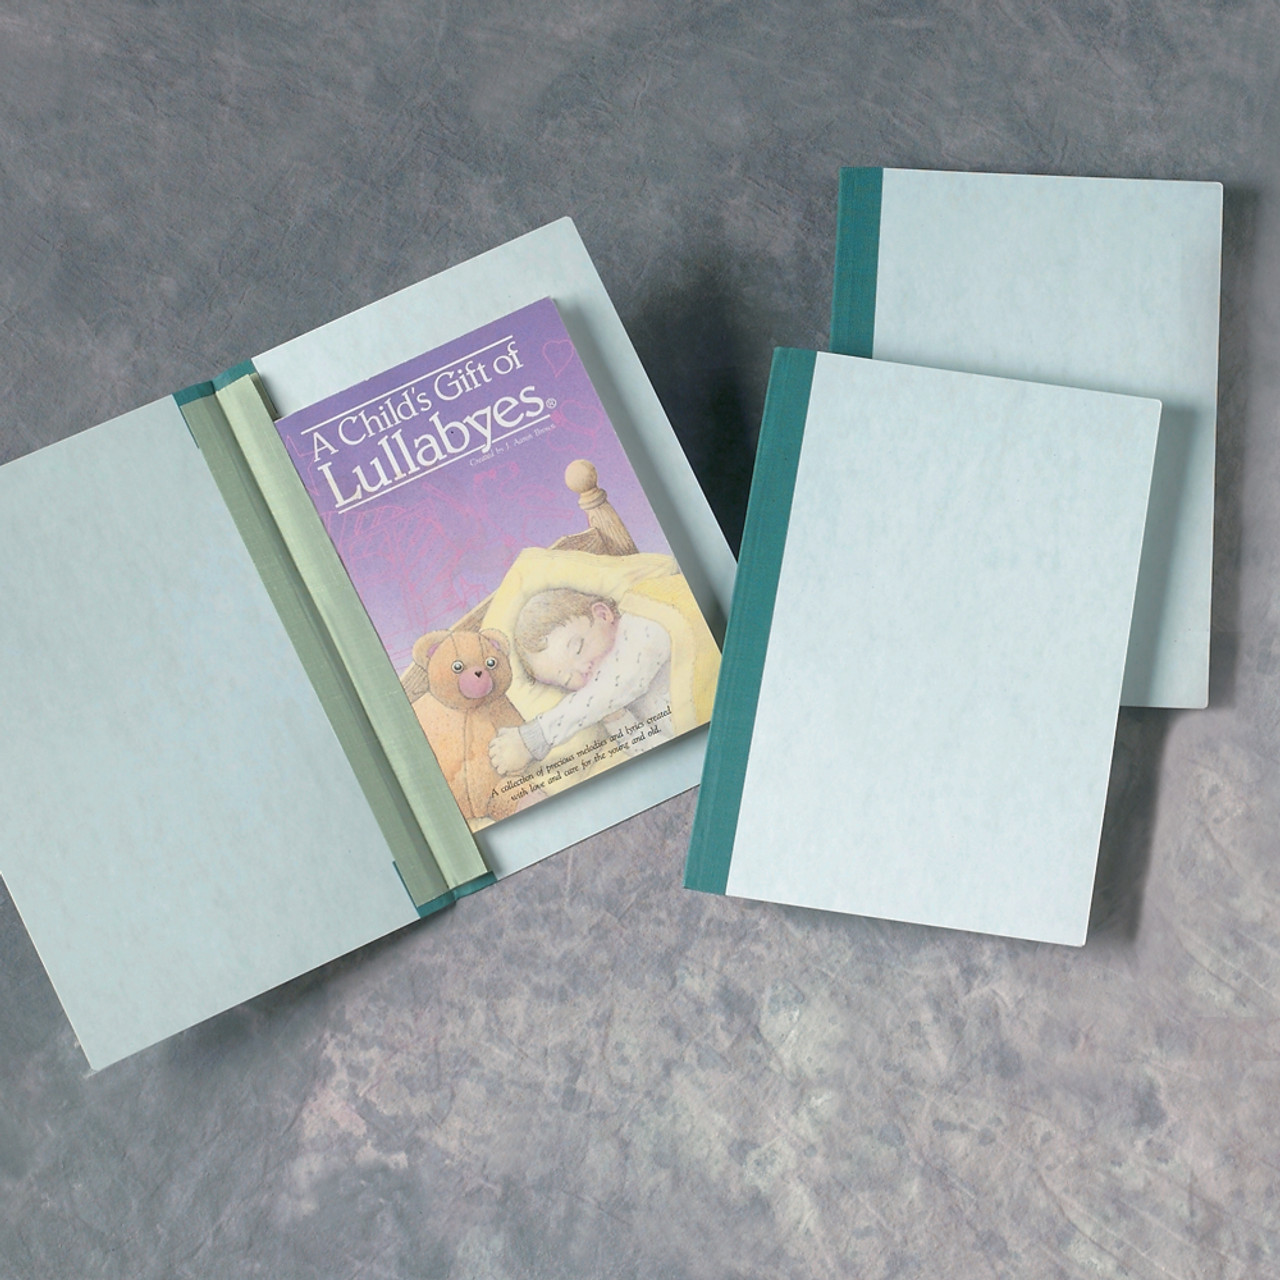 Durable Book and Binder Holders - Neutral Colors